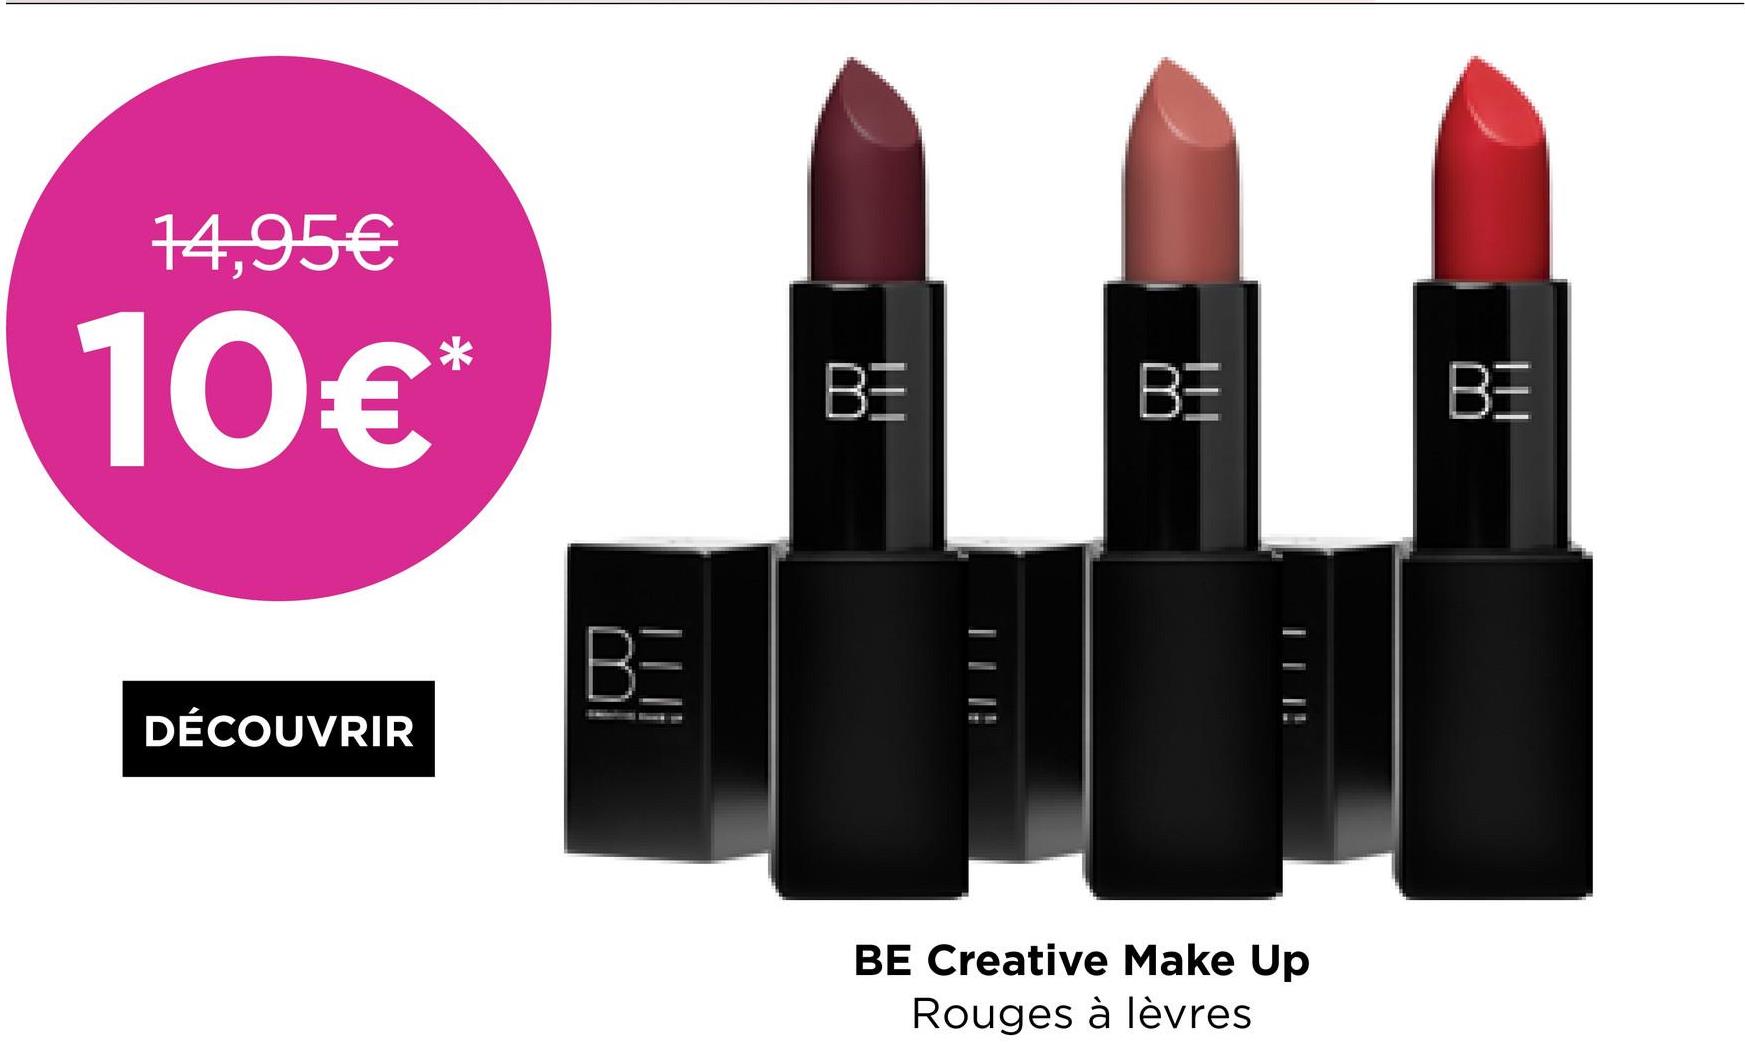 14,95€
10€*
DÉCOUVRIR
BE
BE
BE
BE Creative Make Up
Rouges à lèvres
BE